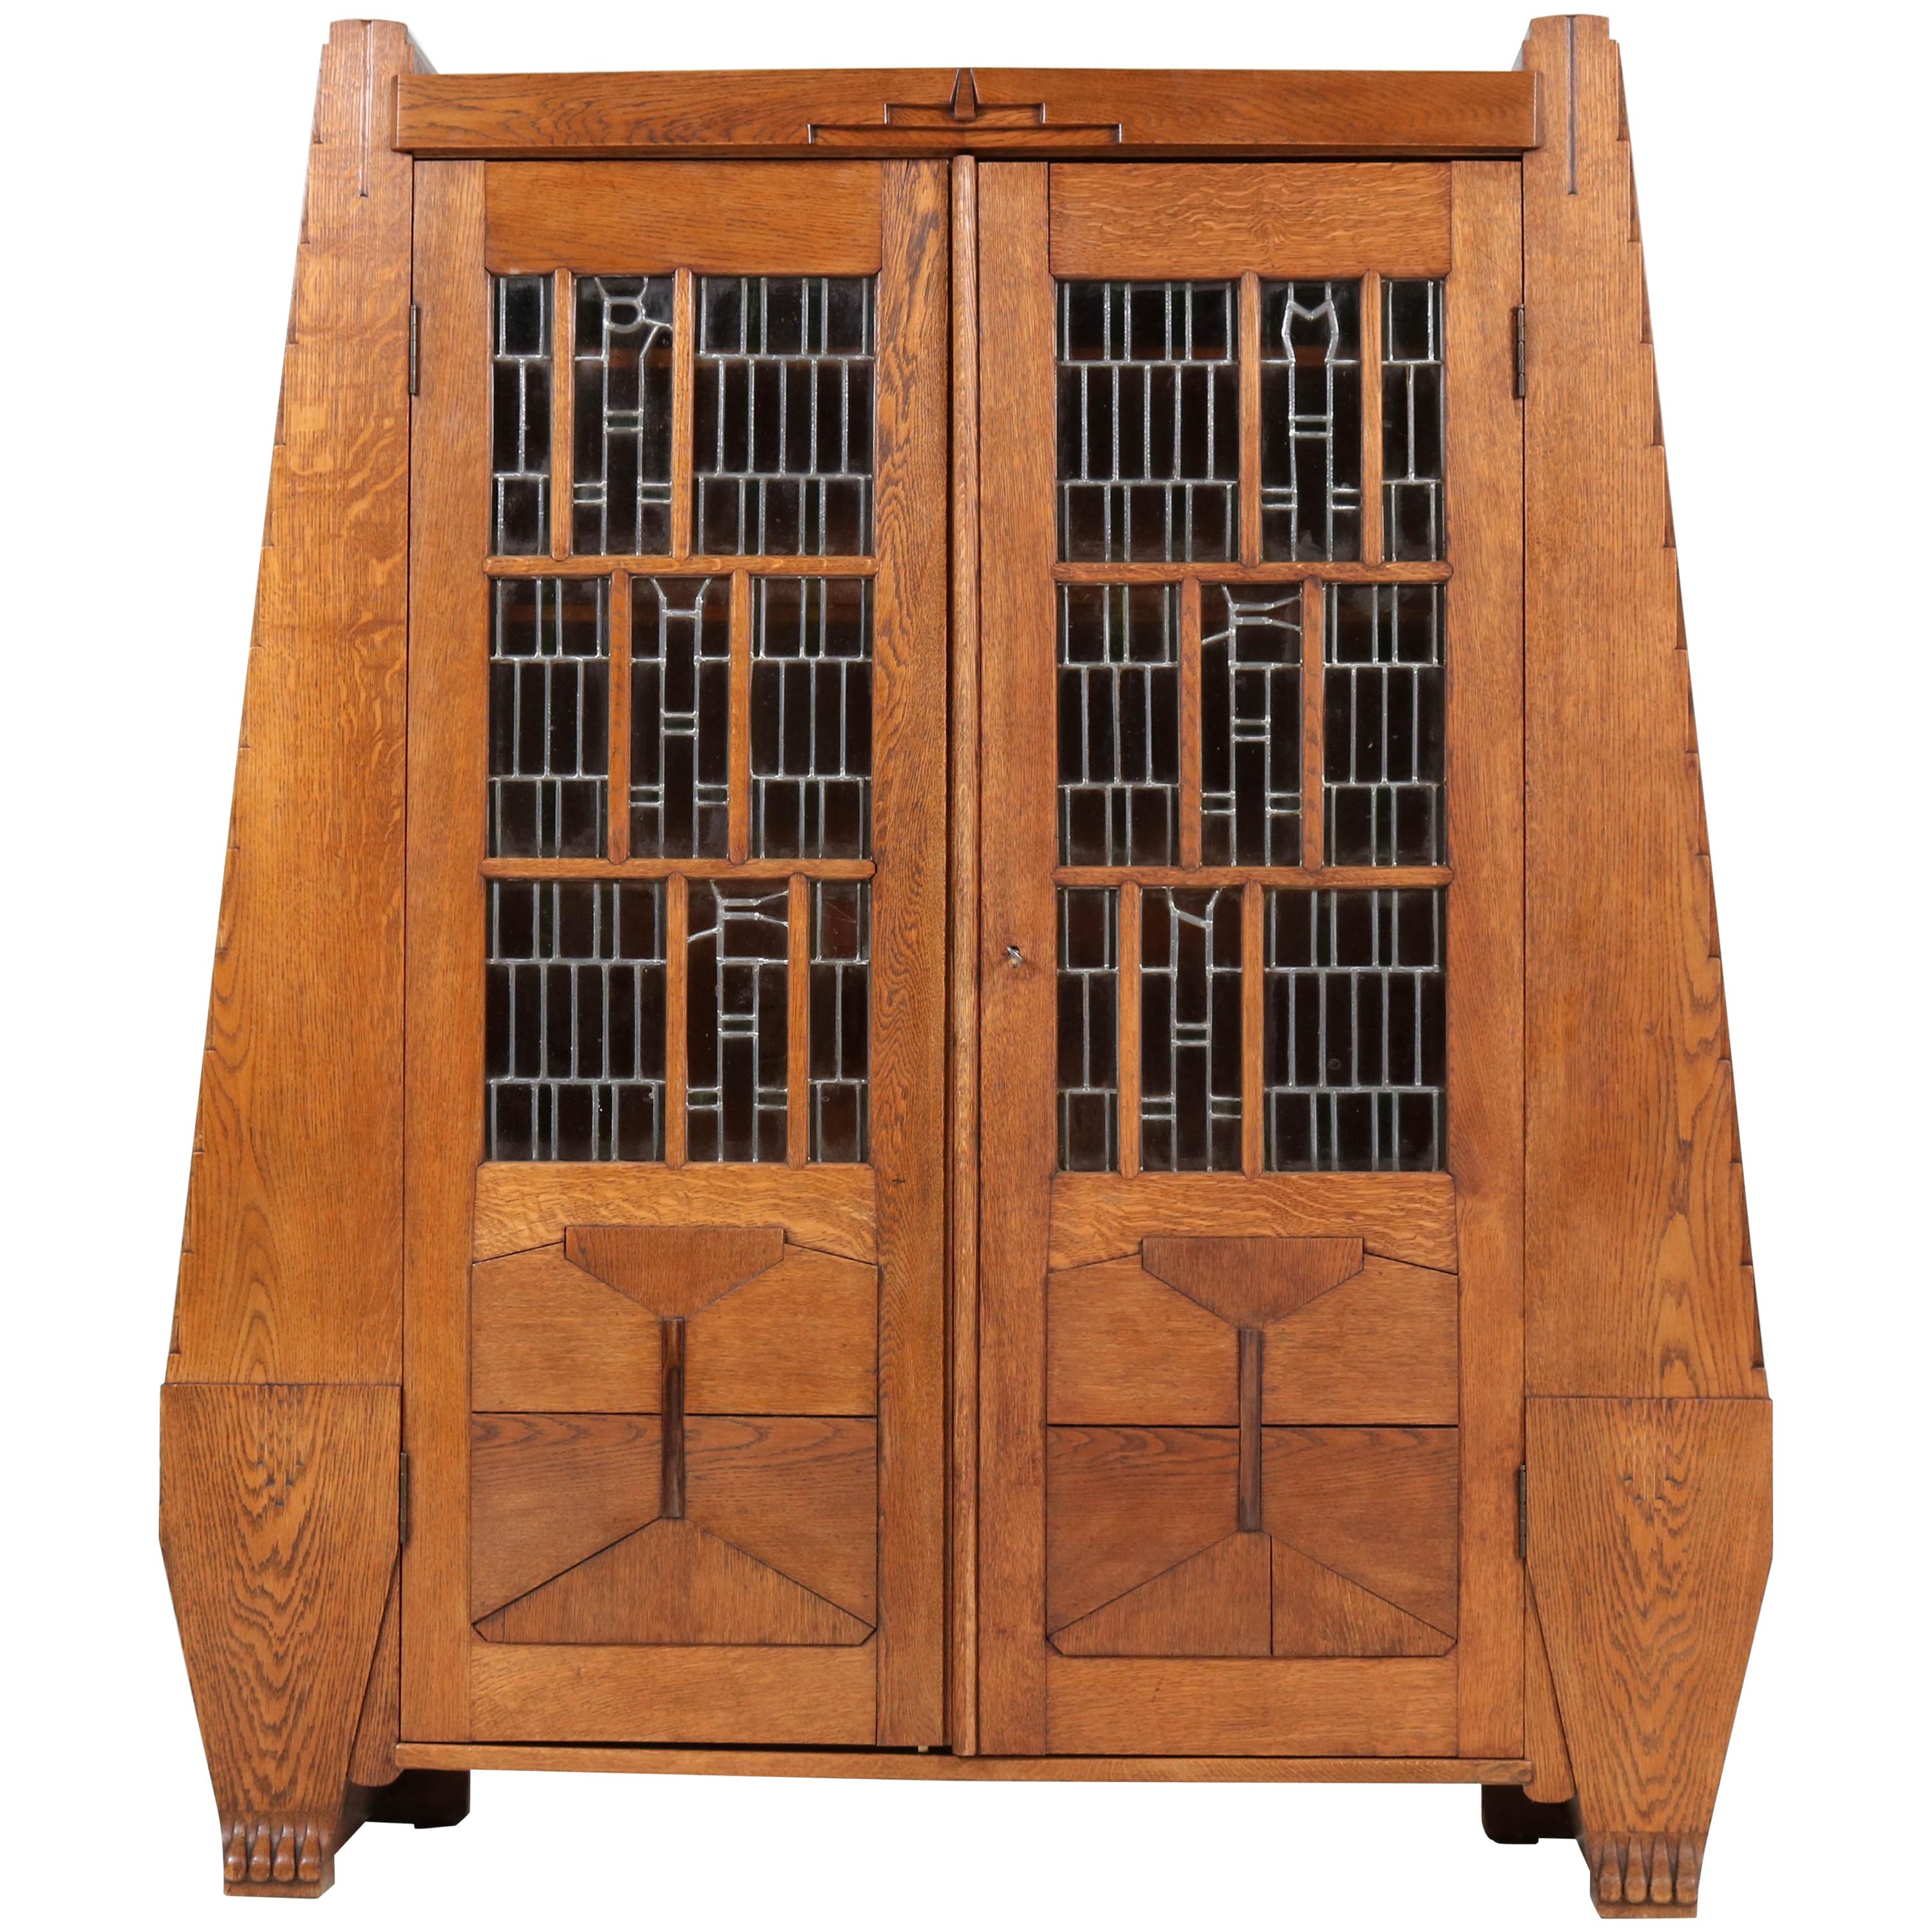 Oak Art Deco Amsterdam School Bookcase with Stained Glass by Hildo Krop, 1918